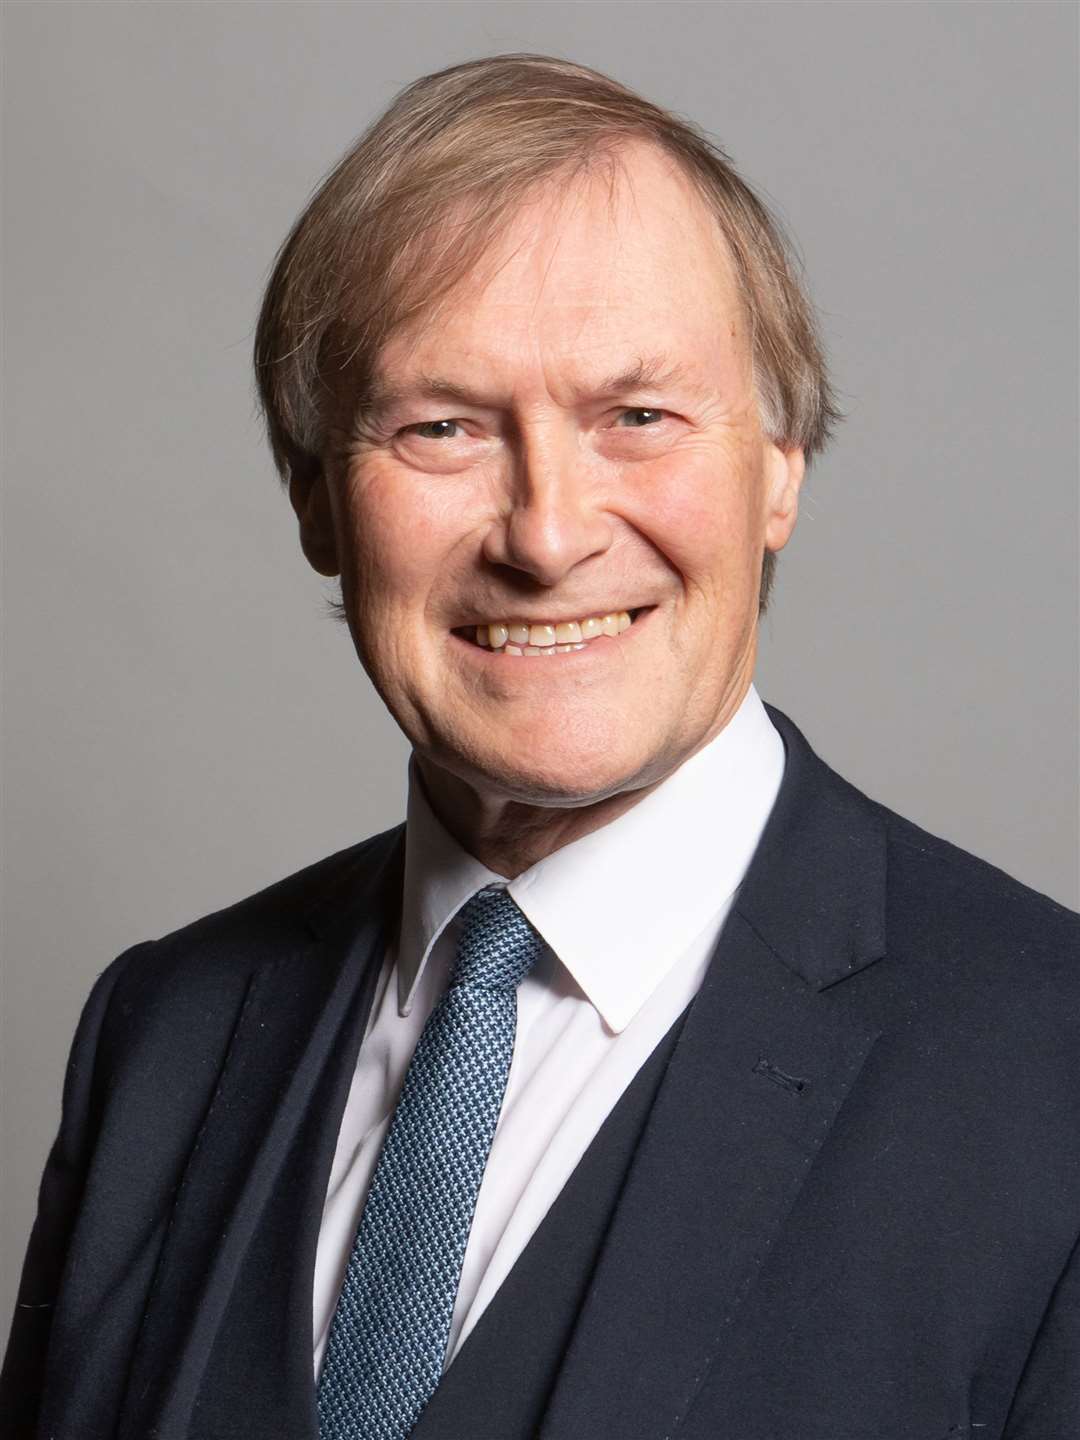 Sir David Amess was stabbed to death while hosting a constituency surgery in October 2021 (Chris McAndrew/PA)